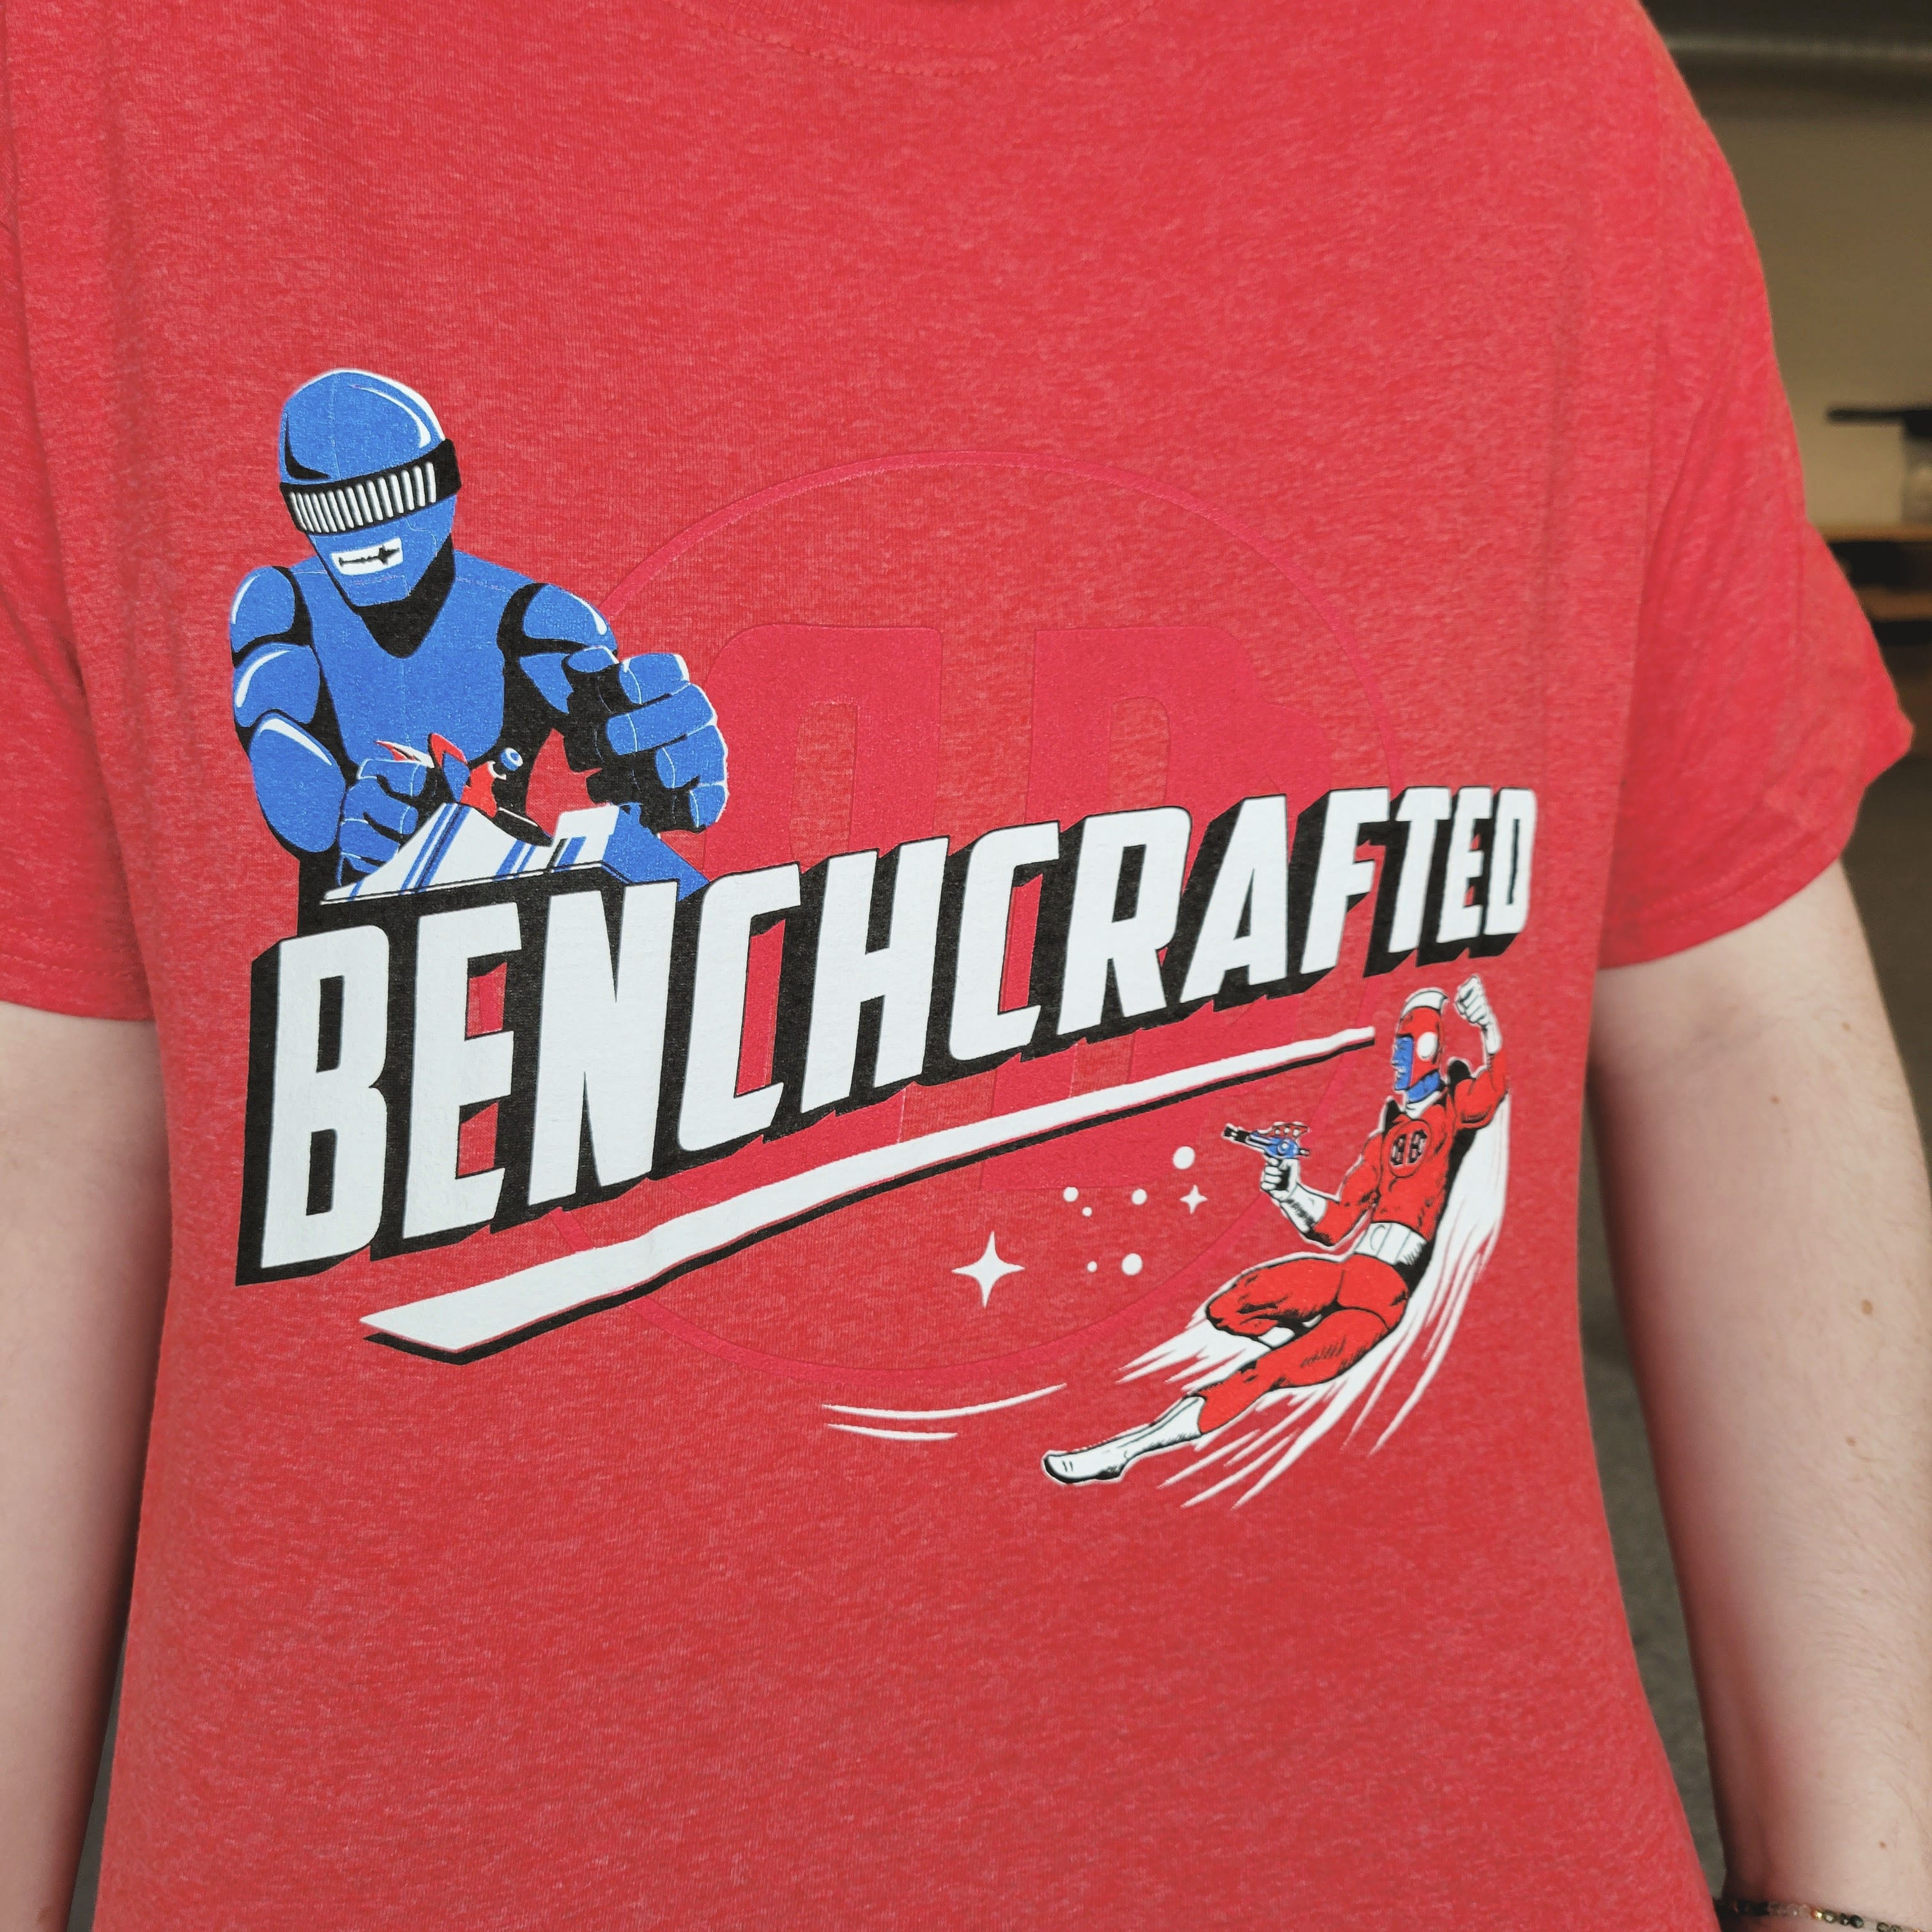 Benchcrafted T-Shirt - Handworks 2023 Edition